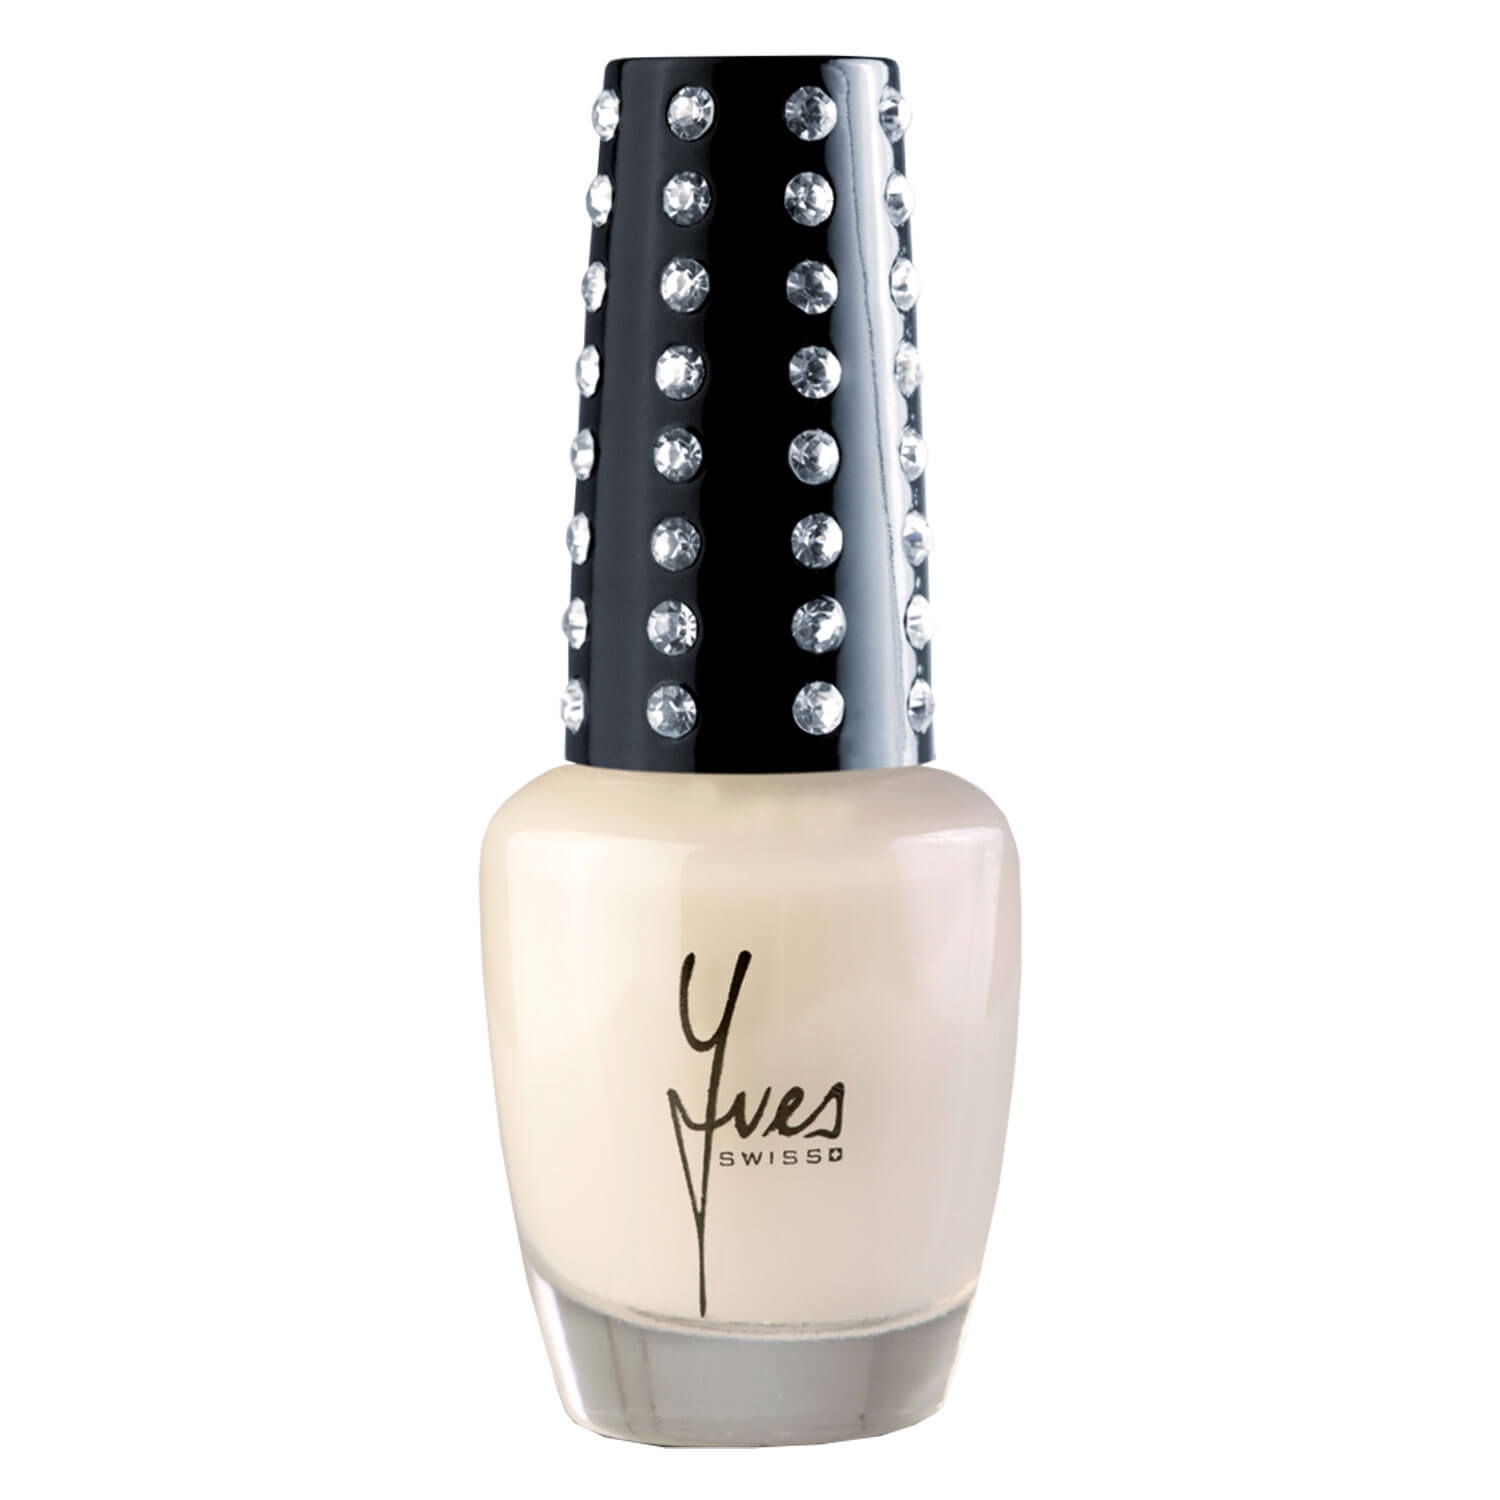 Product image from Yves Swiss - XX12 Nail Repair